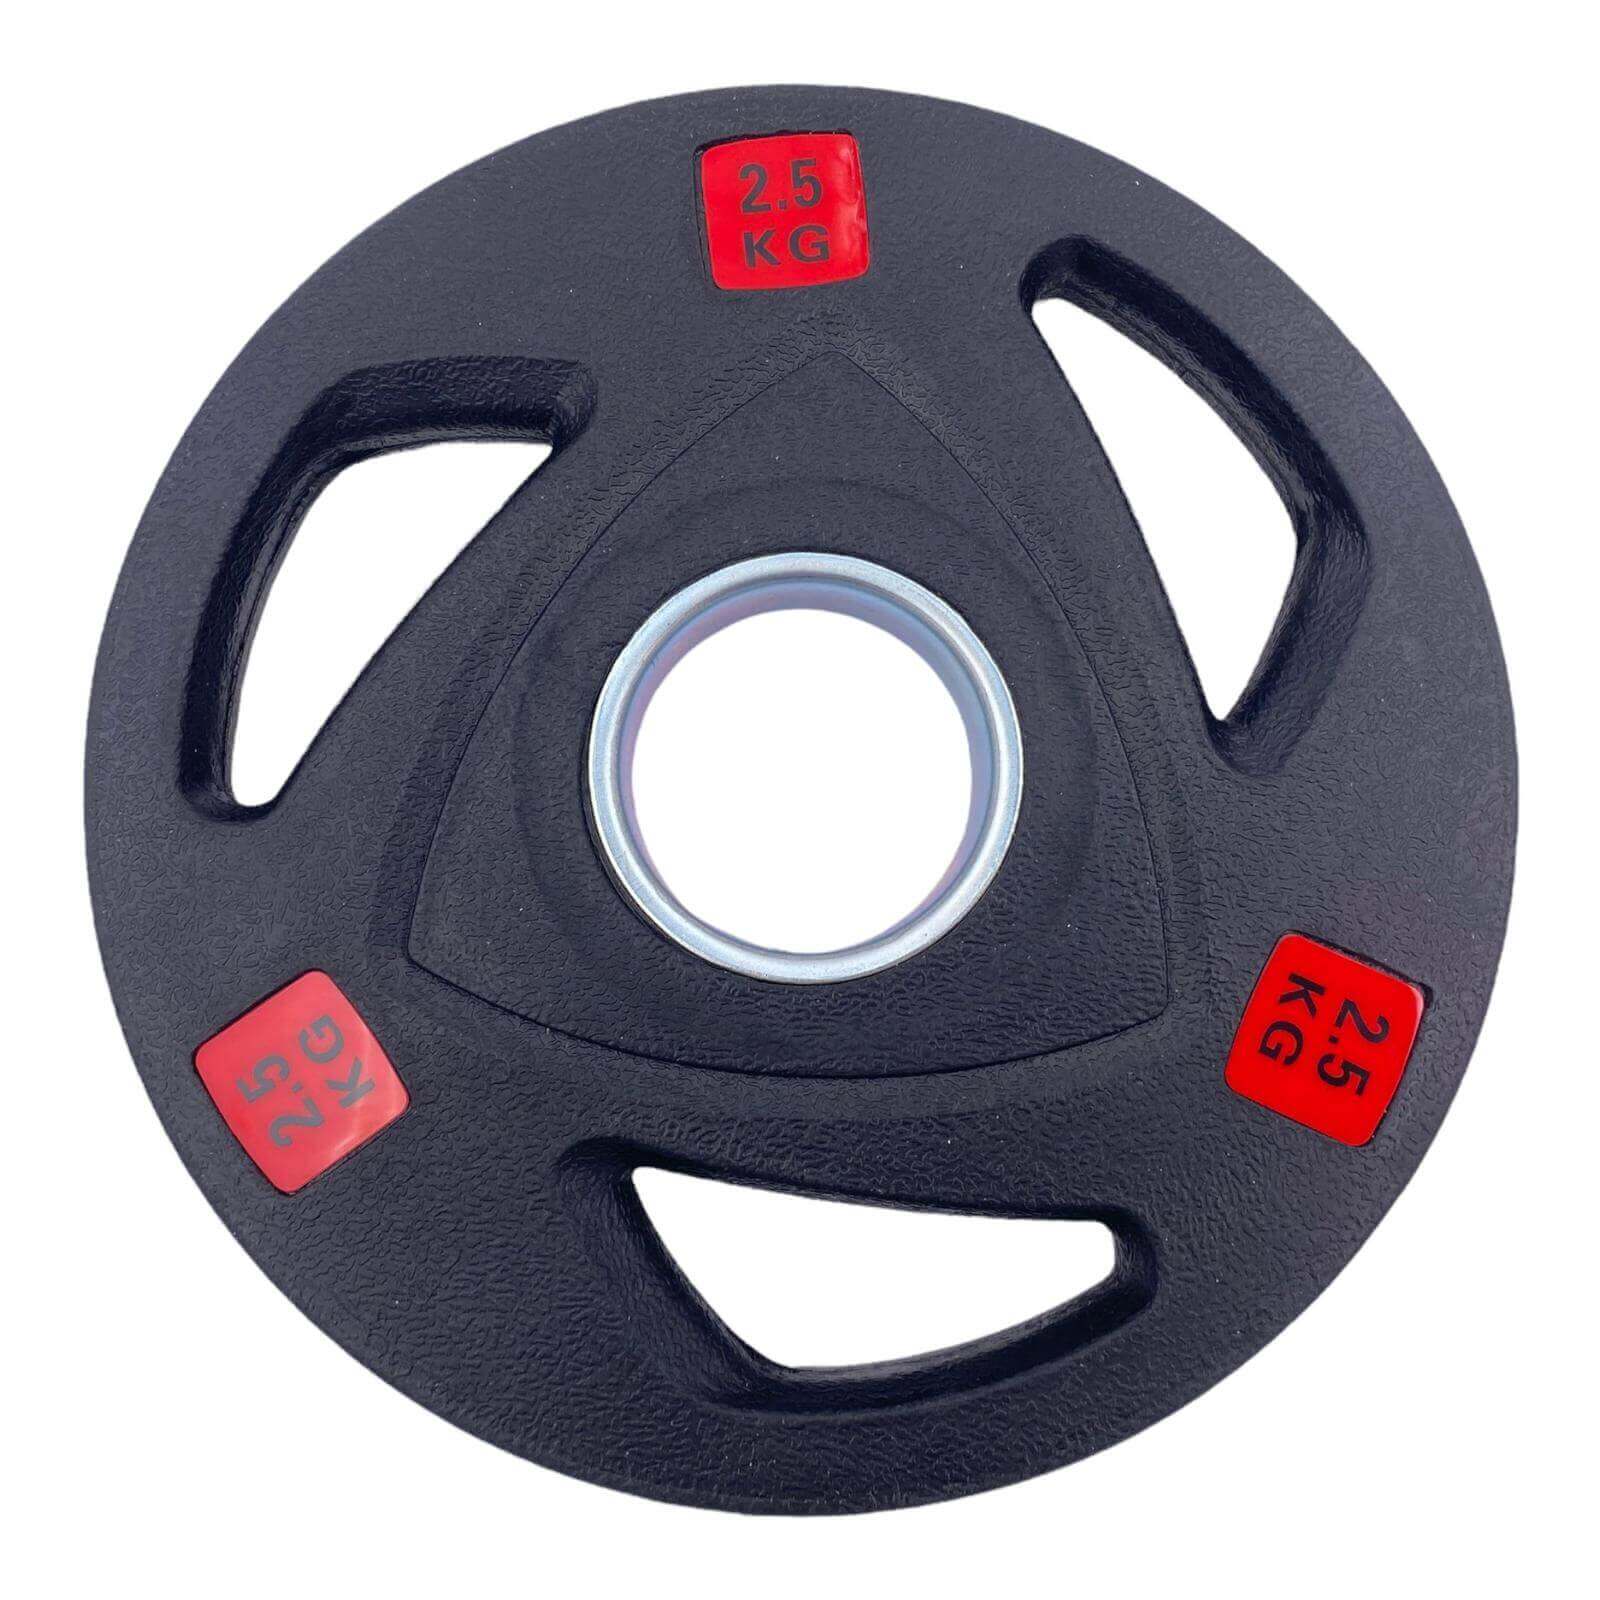 4 x 2.5kg Rubber Tri-grip Weight Plates Type-A | INSOURCE